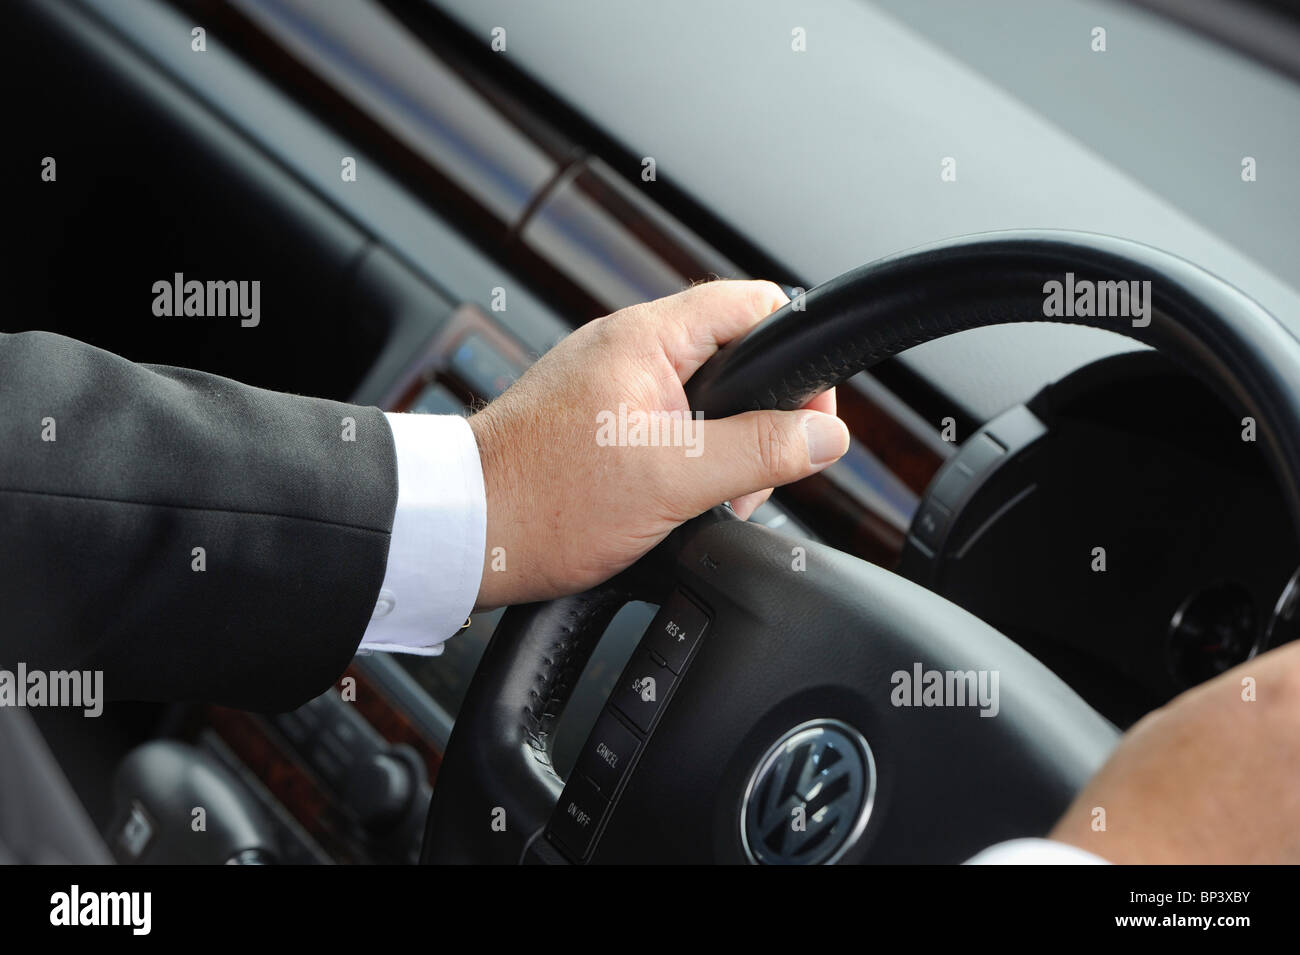 A businessman at the wheel of a Volkswagen car. Stock Photo